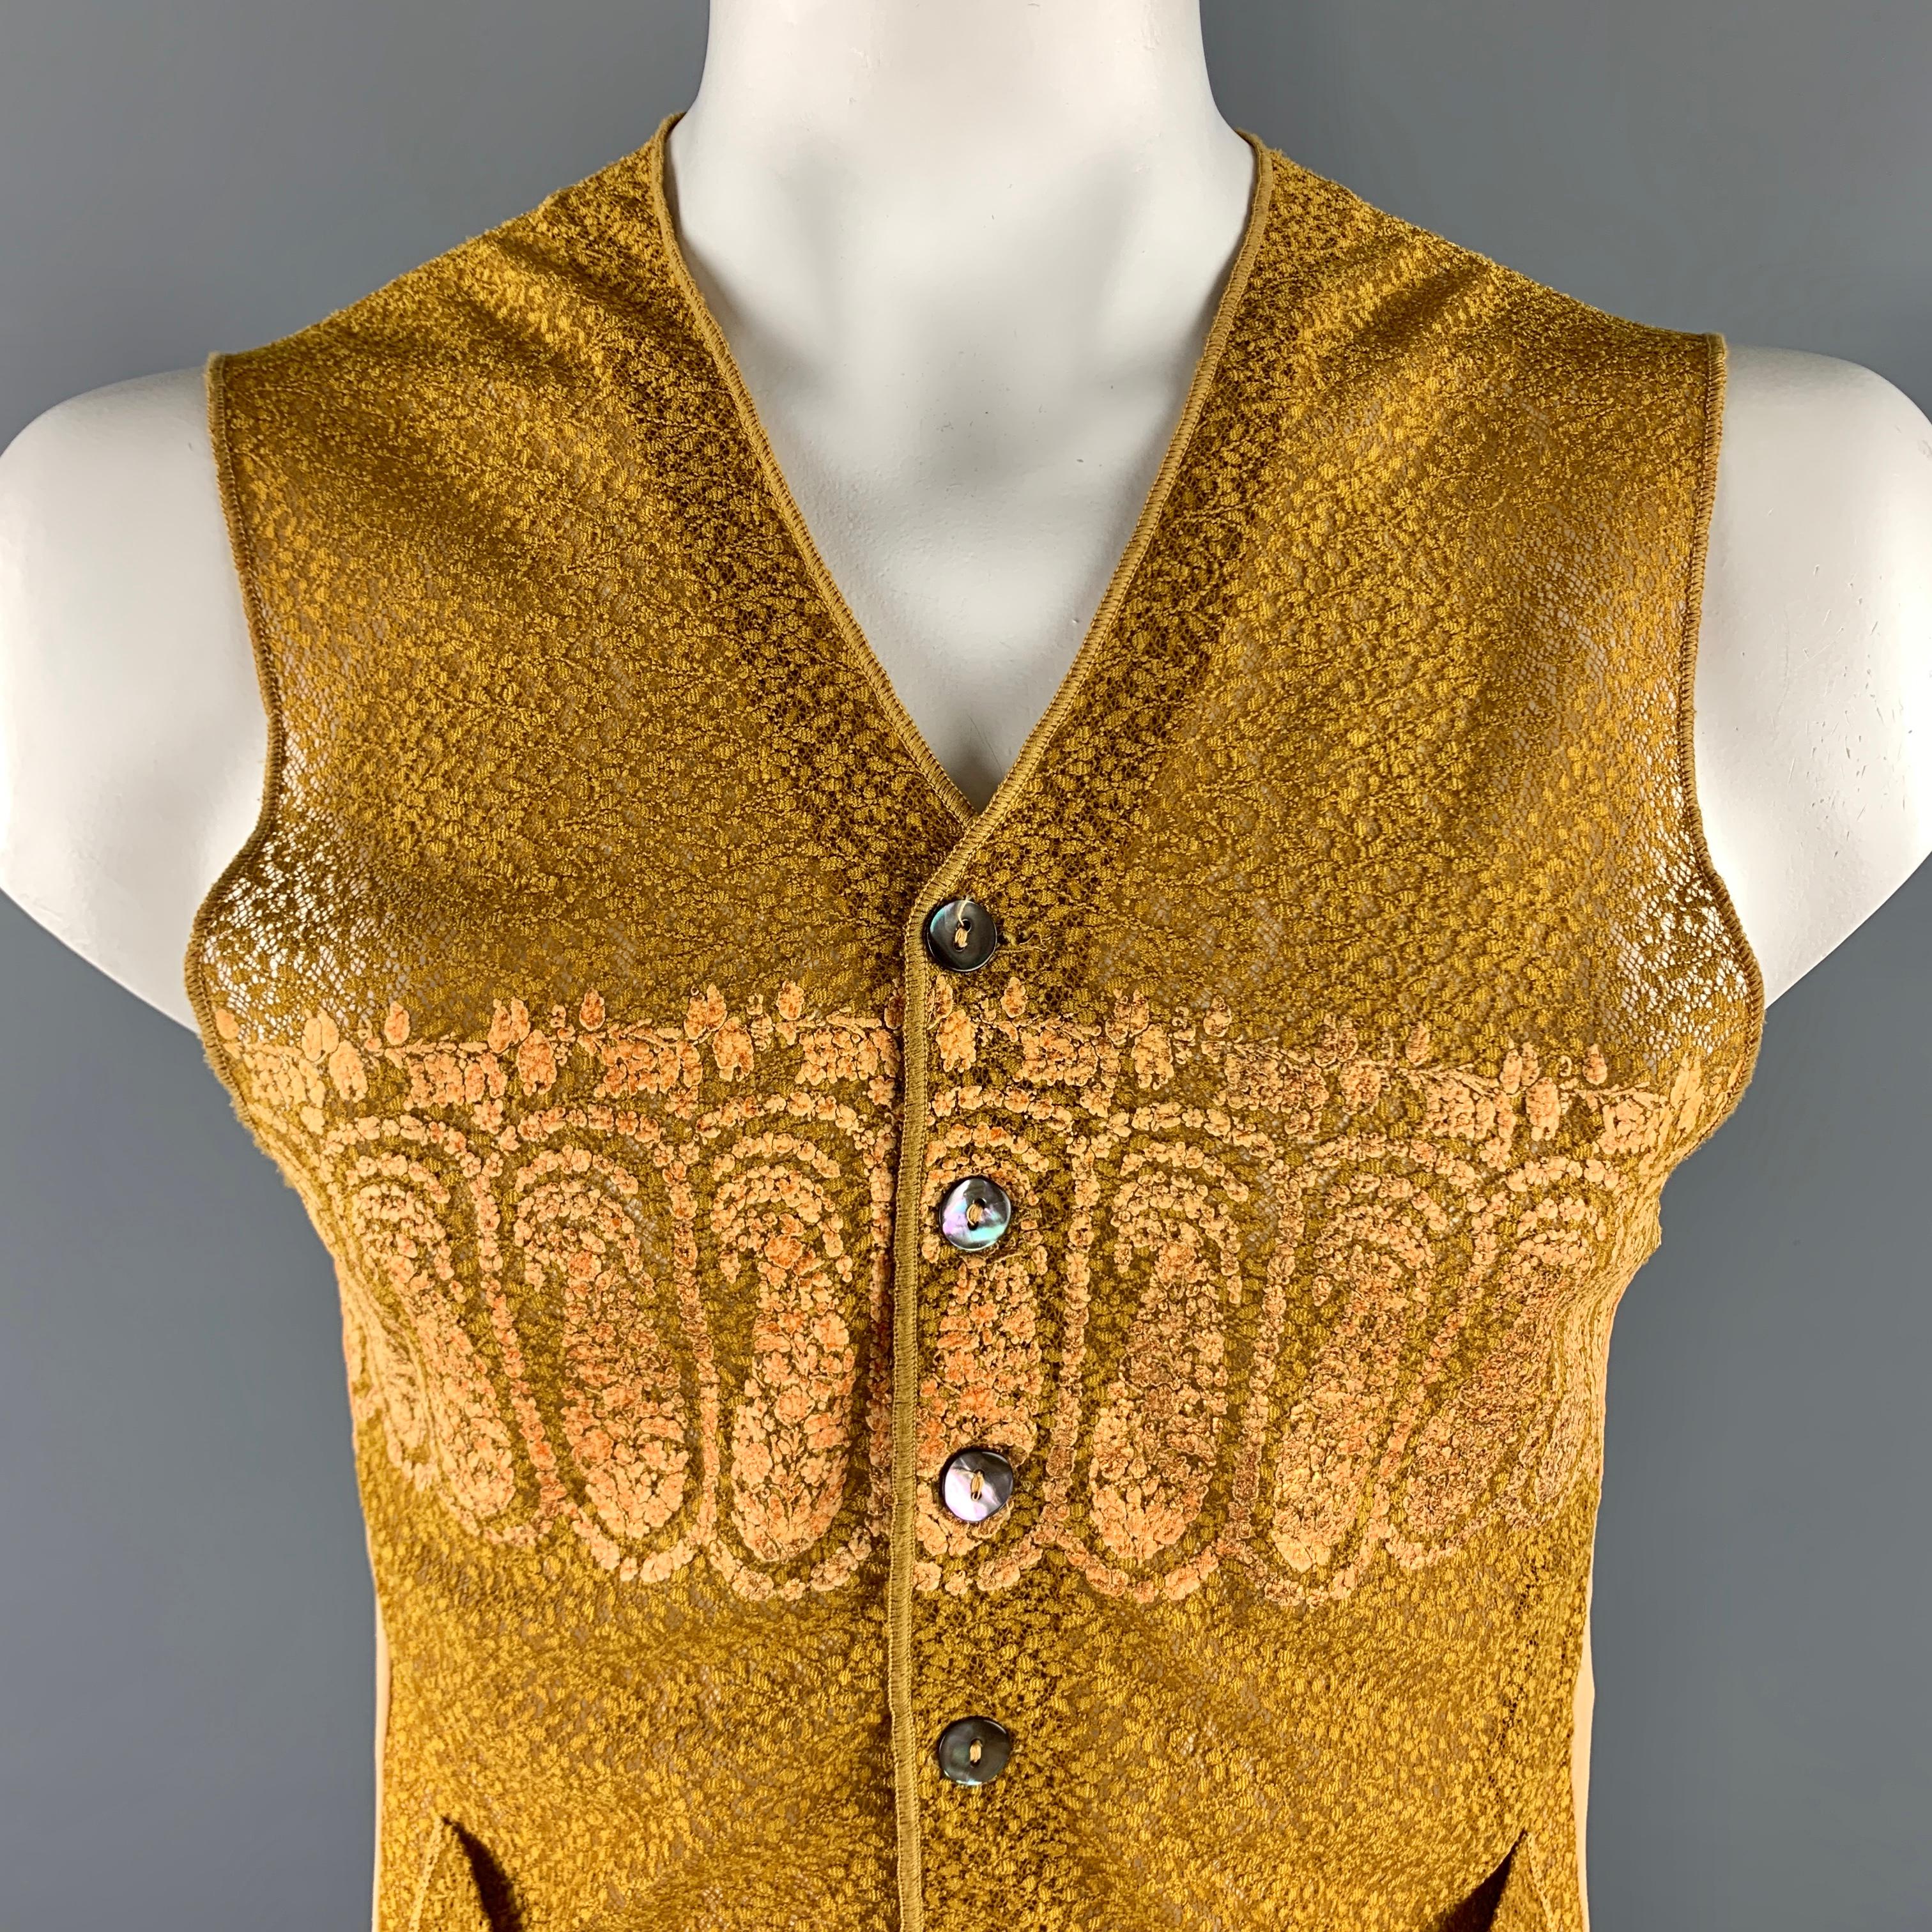 Vintage JEAN PAUL GAULTIER vest comes in gold and beige lace and mesh polyamide material, featuring a gold lace pale at front and shoulder, patch pockets, embellishment at chest, buttoned. Made in Italy.

Excellent Pre-Owned Condition.
Marked: